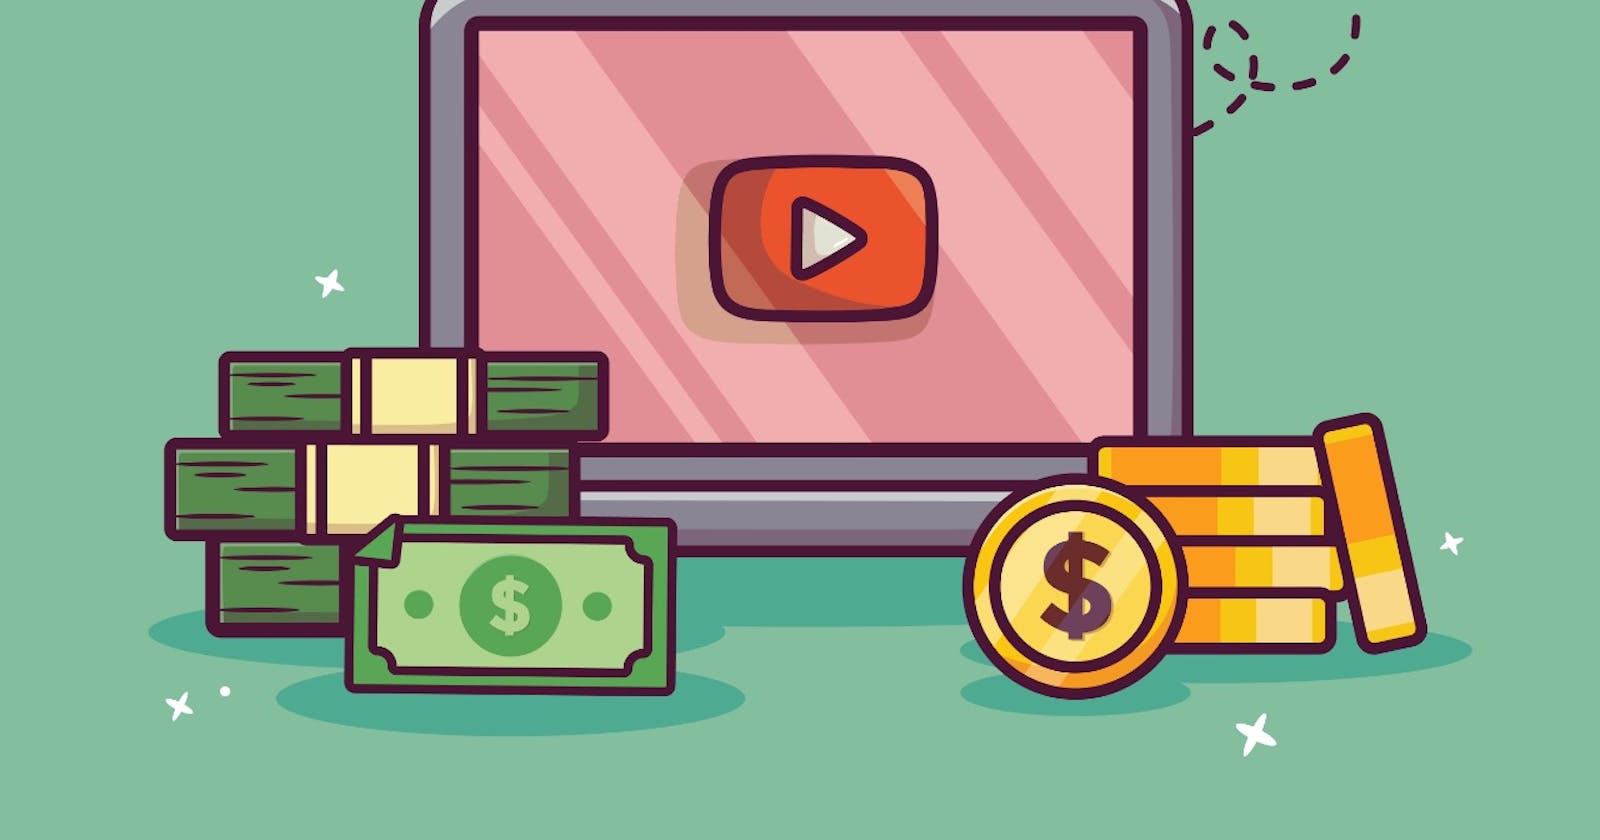 4 Types of Video Ads to Monetize Your Videos